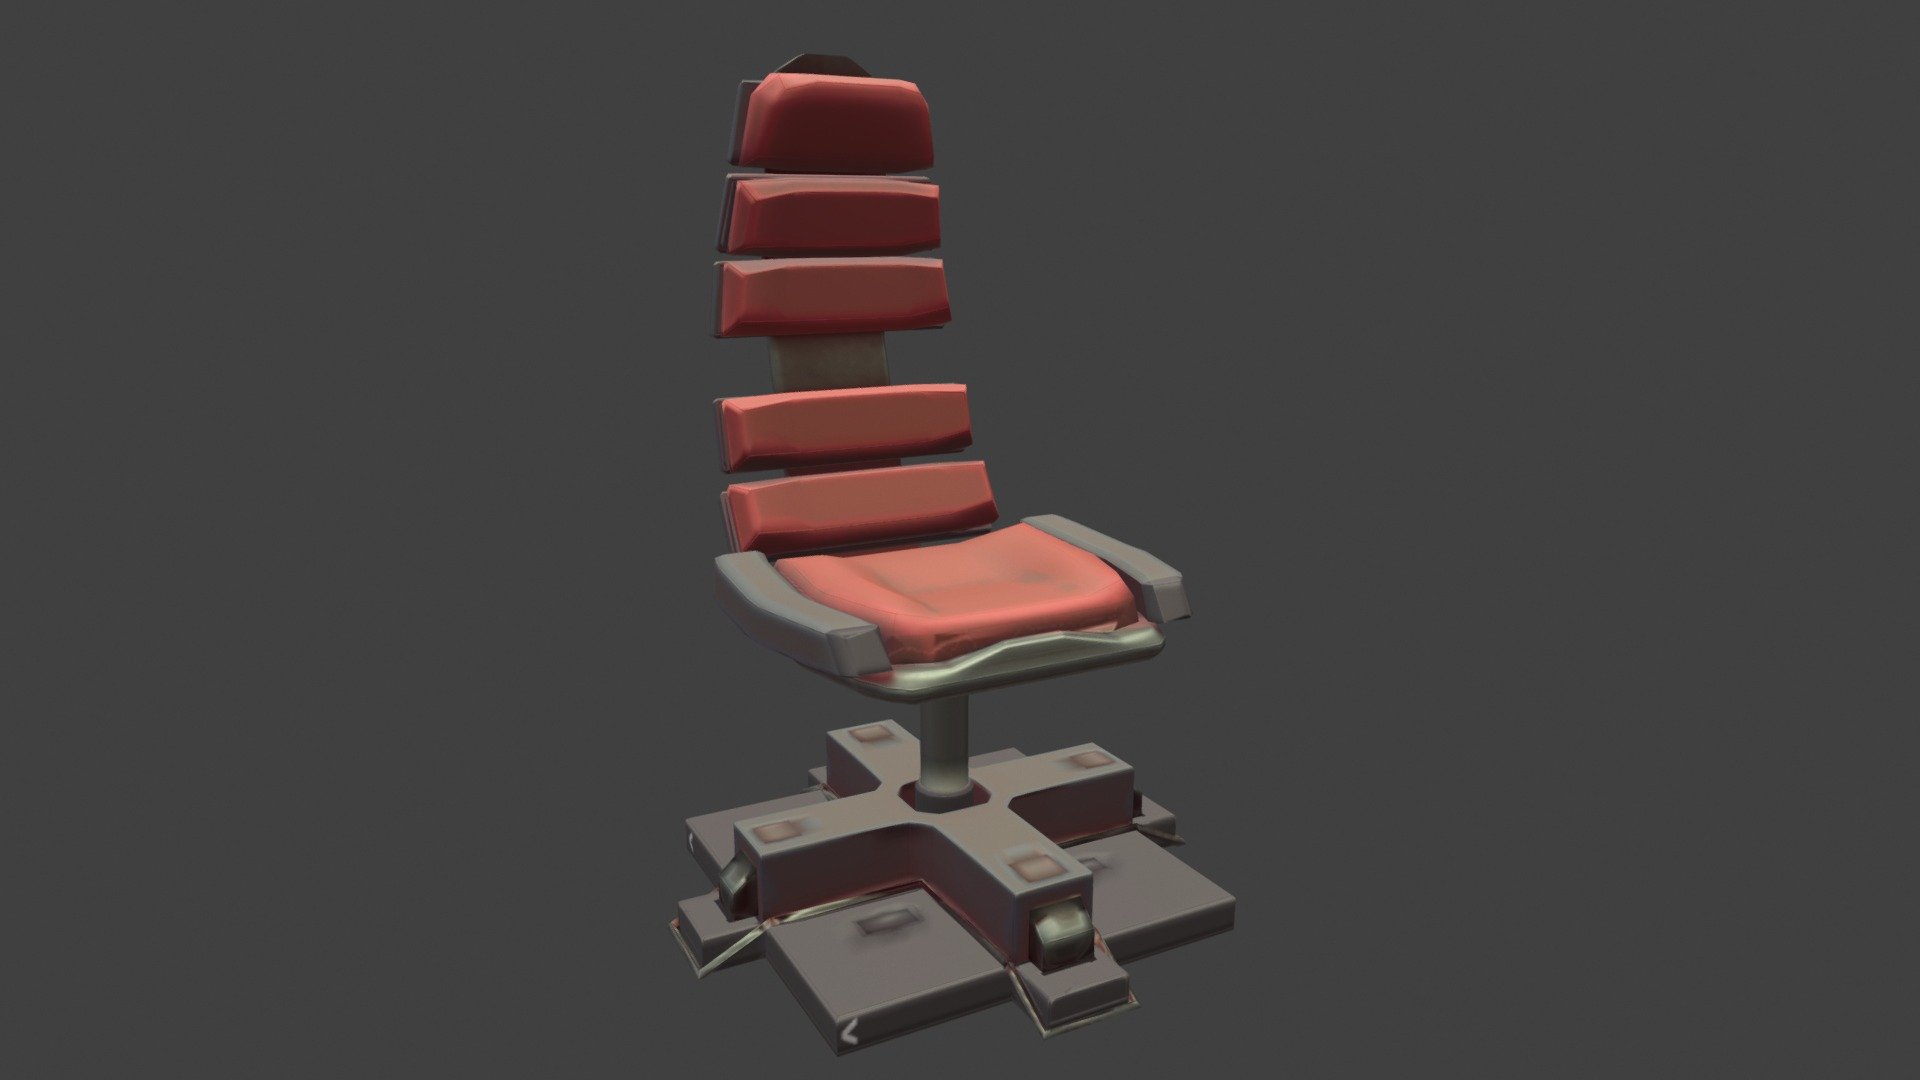 -3D cyberpunk chair for a futuristic videogame

-Made with Maya and Textures in Substance

-Made by @caco_calle - Stylized Sci-Fi Chair - 3D model by Caco Calle (@caco_calle) 3d model